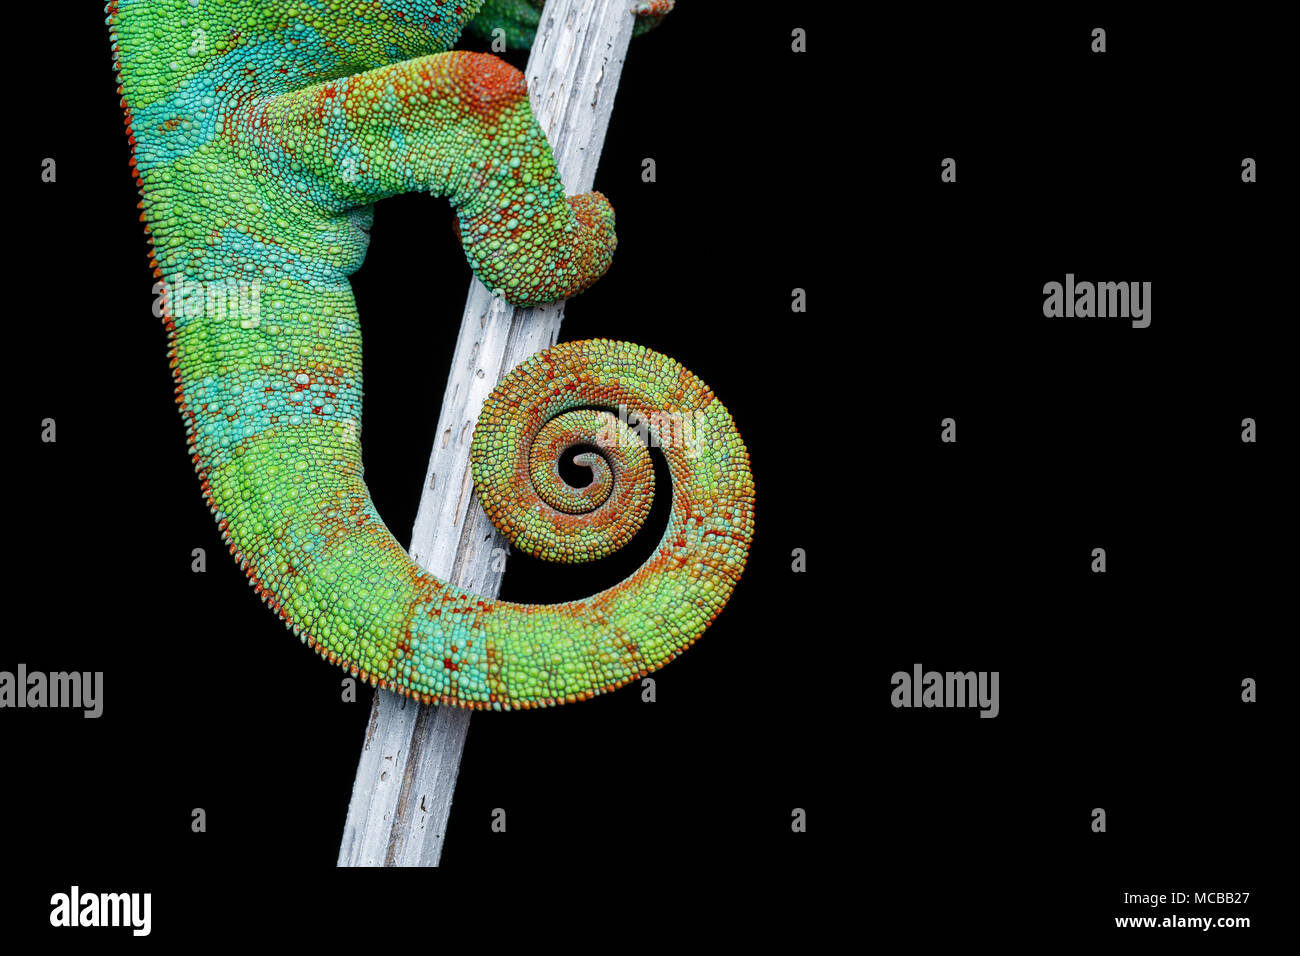 alive chameleon reptile sitting on branch. macro studio shot of reptile tail on black background. copy space. Stock Photo